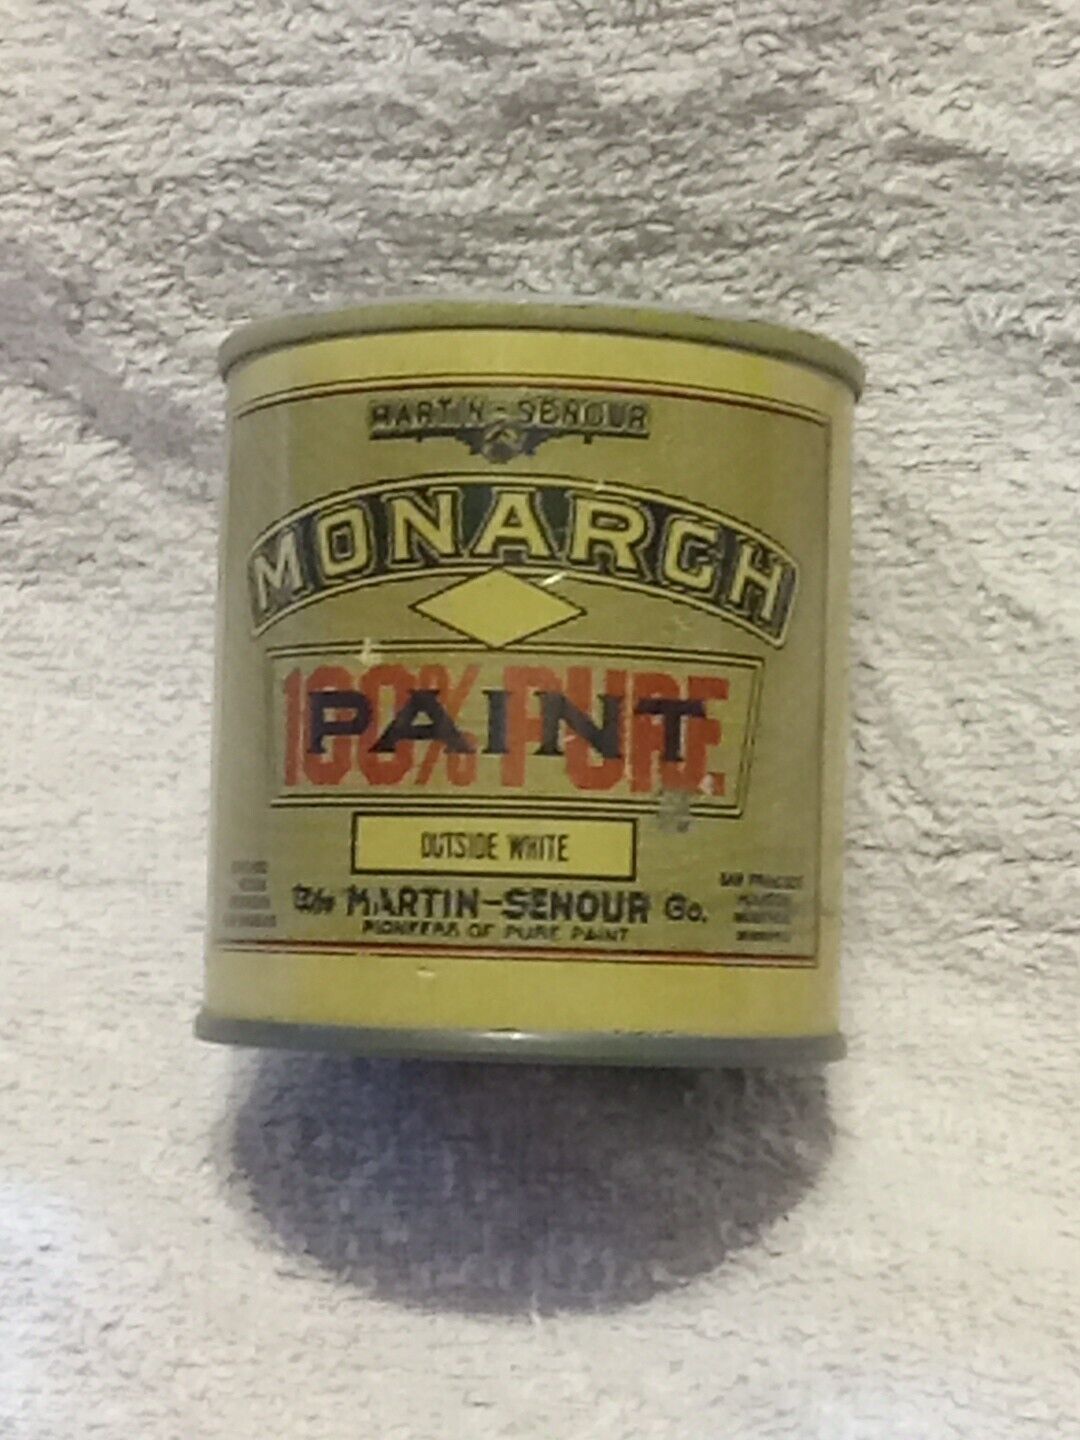 Vintage Monarch Paint Can Coin Savings Bank Note inside Dated 1938